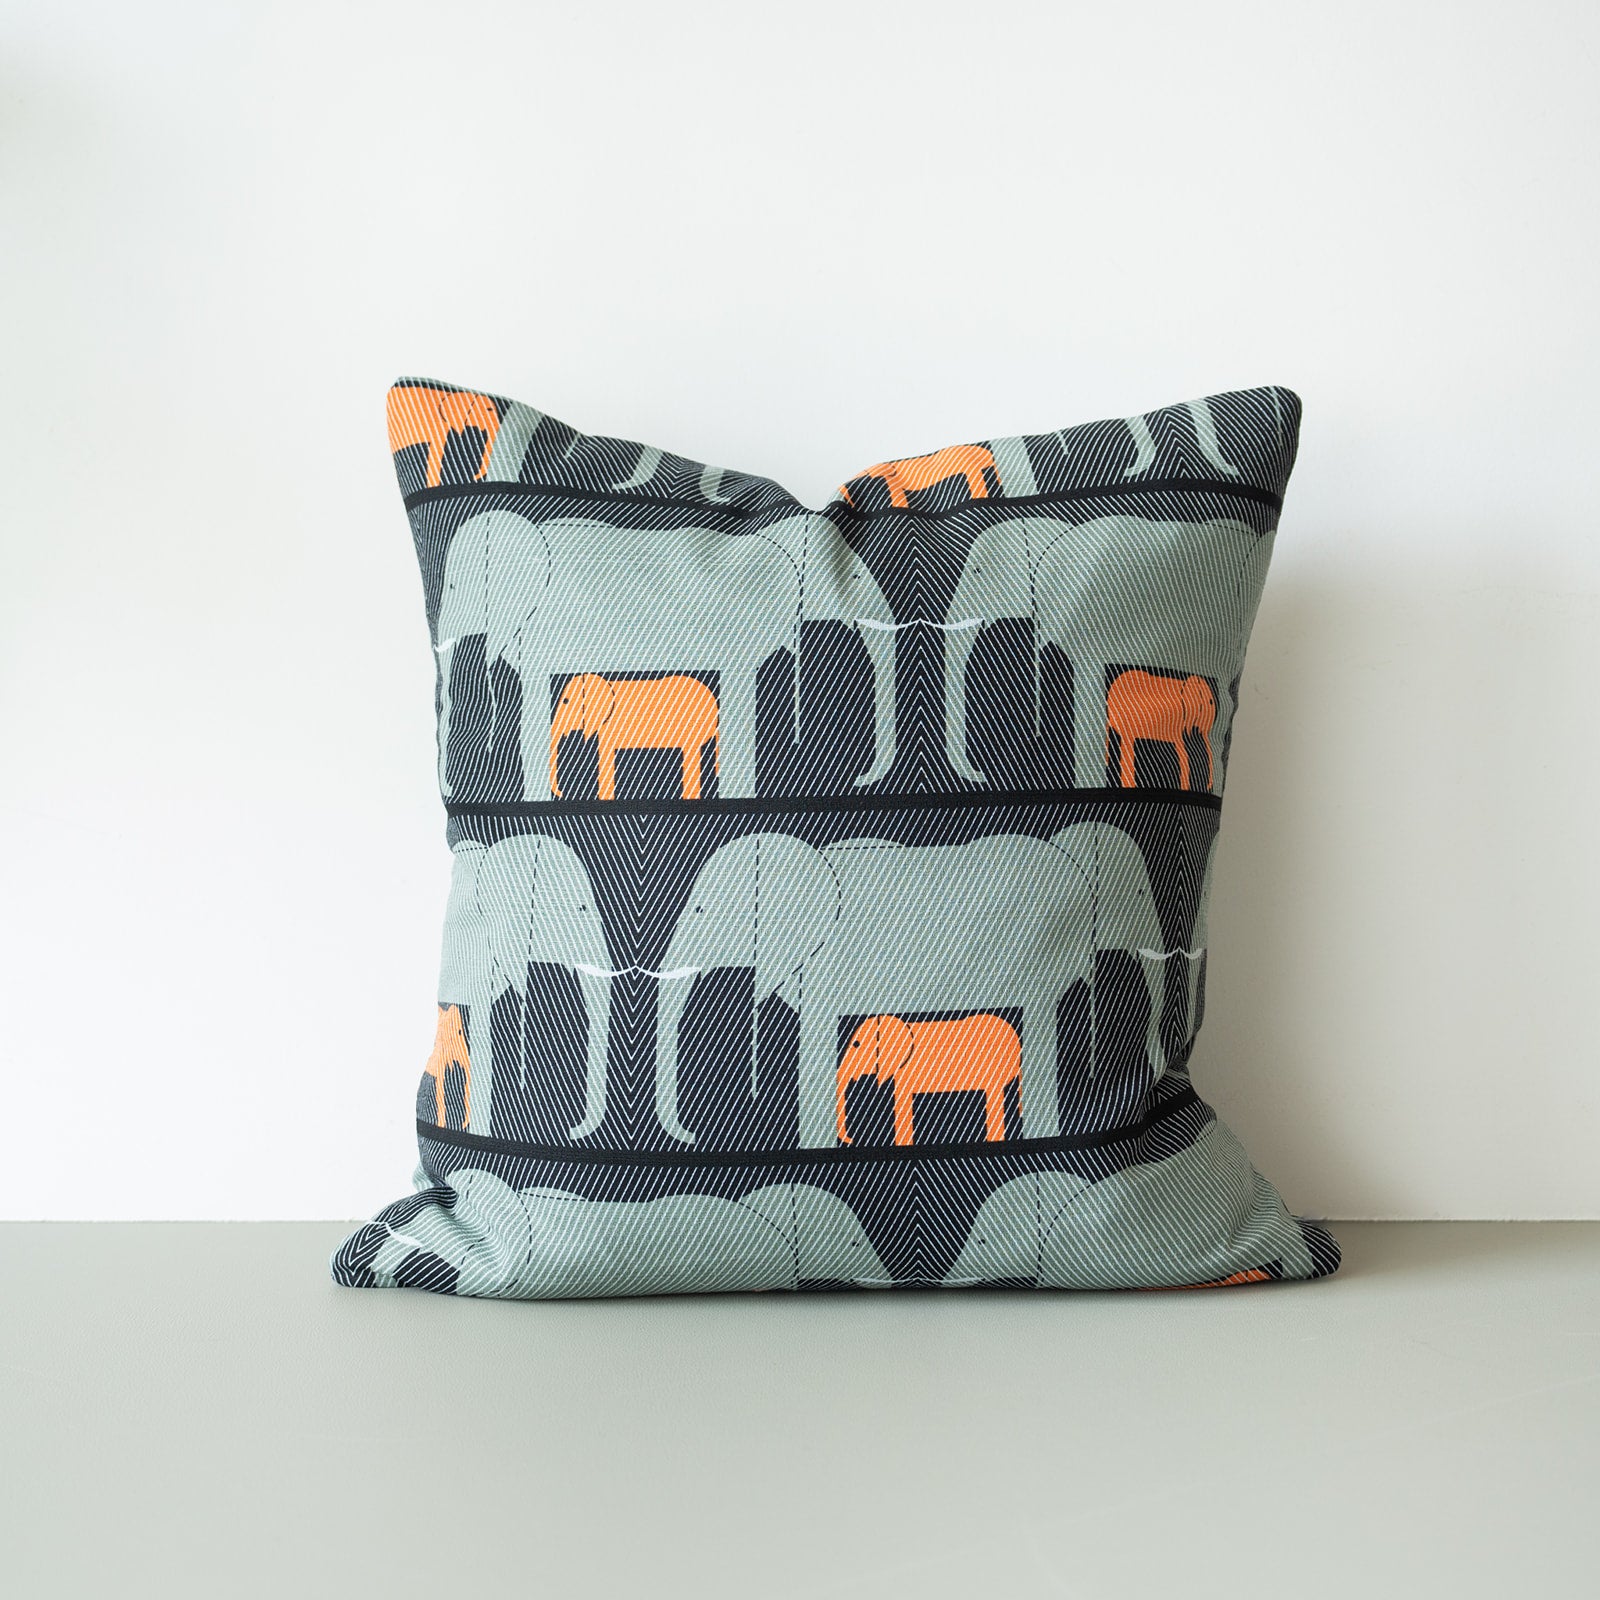 Charley Harper Throw Pillow Cover